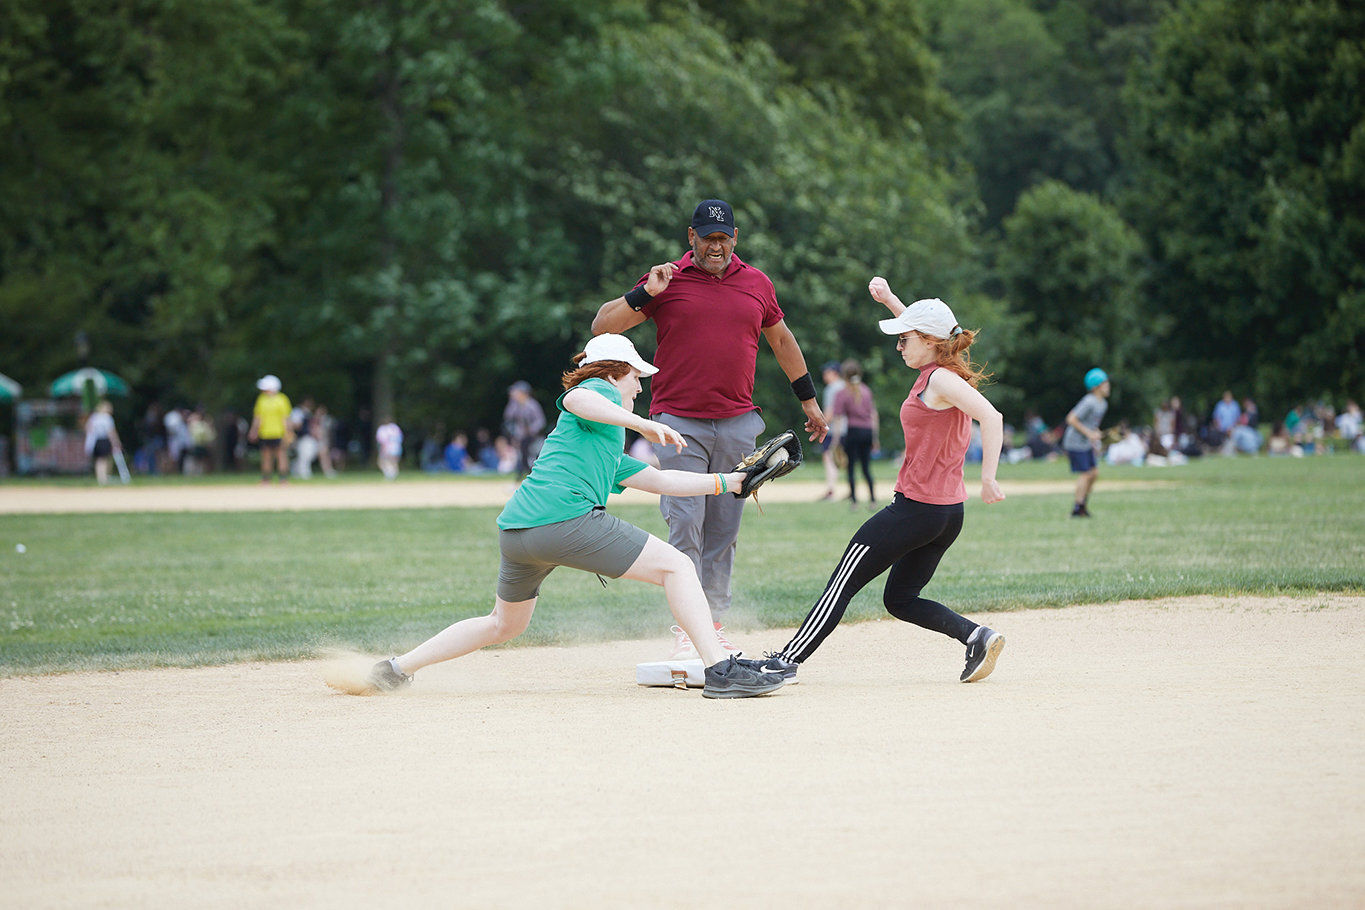 Mary Grace Lewis of the Basilica of St. Patrick’s Old Cathedral pulls into third base as Sean Halbert of St. Patrick’s Old Cathedral attempts to apply the tag during a 7-6 victory for St. Patrick’s June 18 on the Great Lawn in Central Park. Looking on is St. Patrick’s co-captain and third-base coach Omar Yapor.